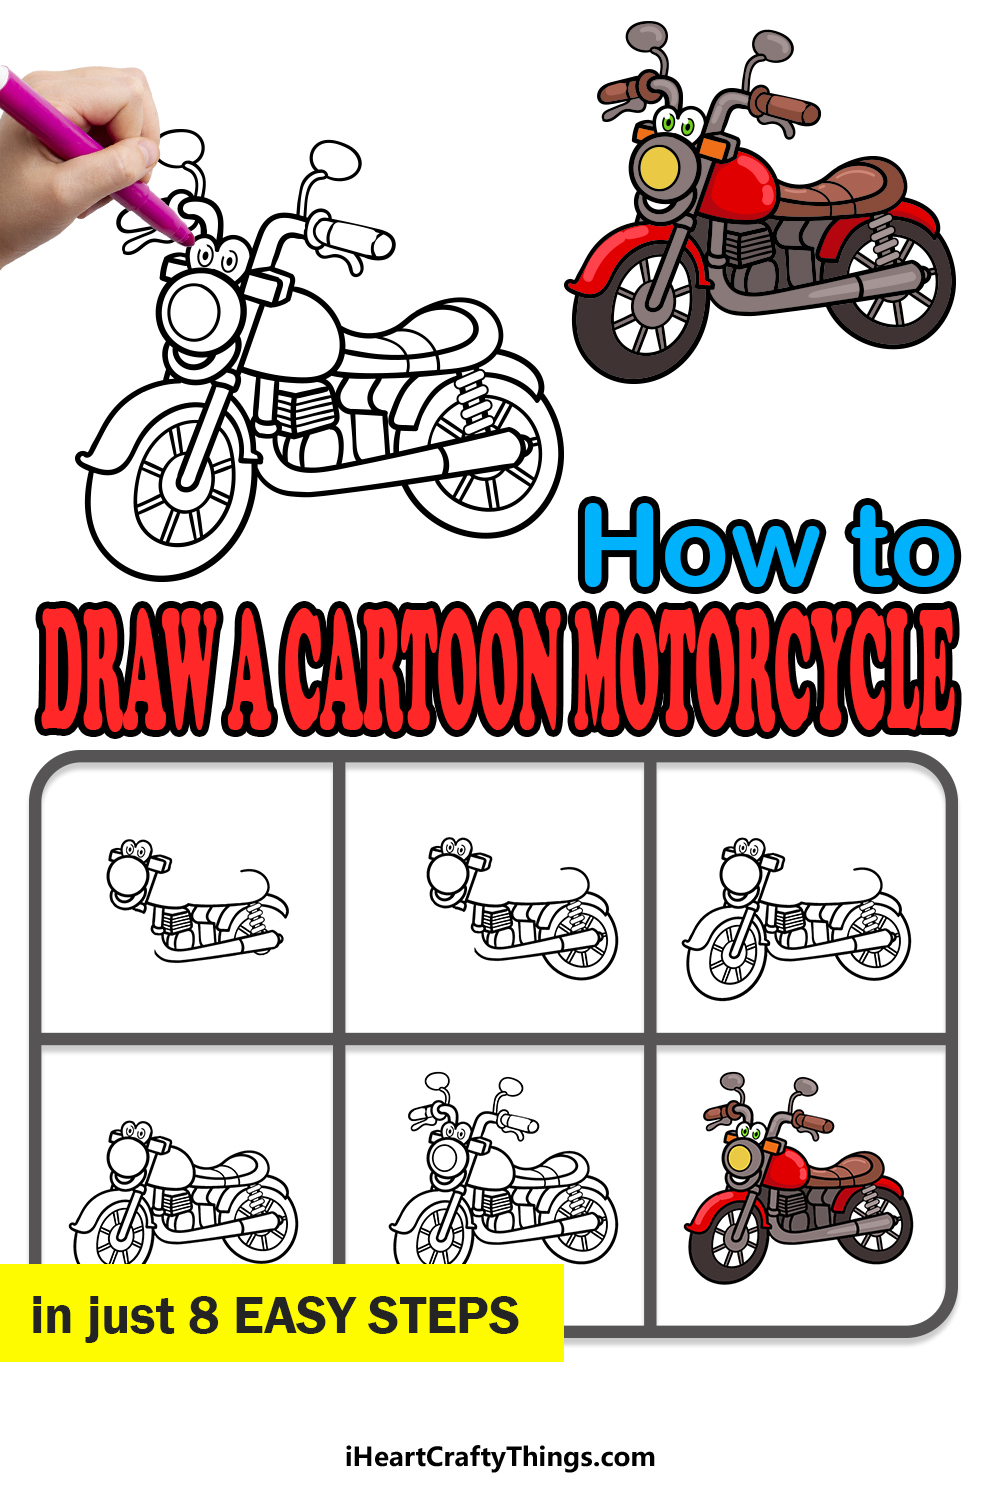 how to draw a cartoon motorcycle in 8 easy steps